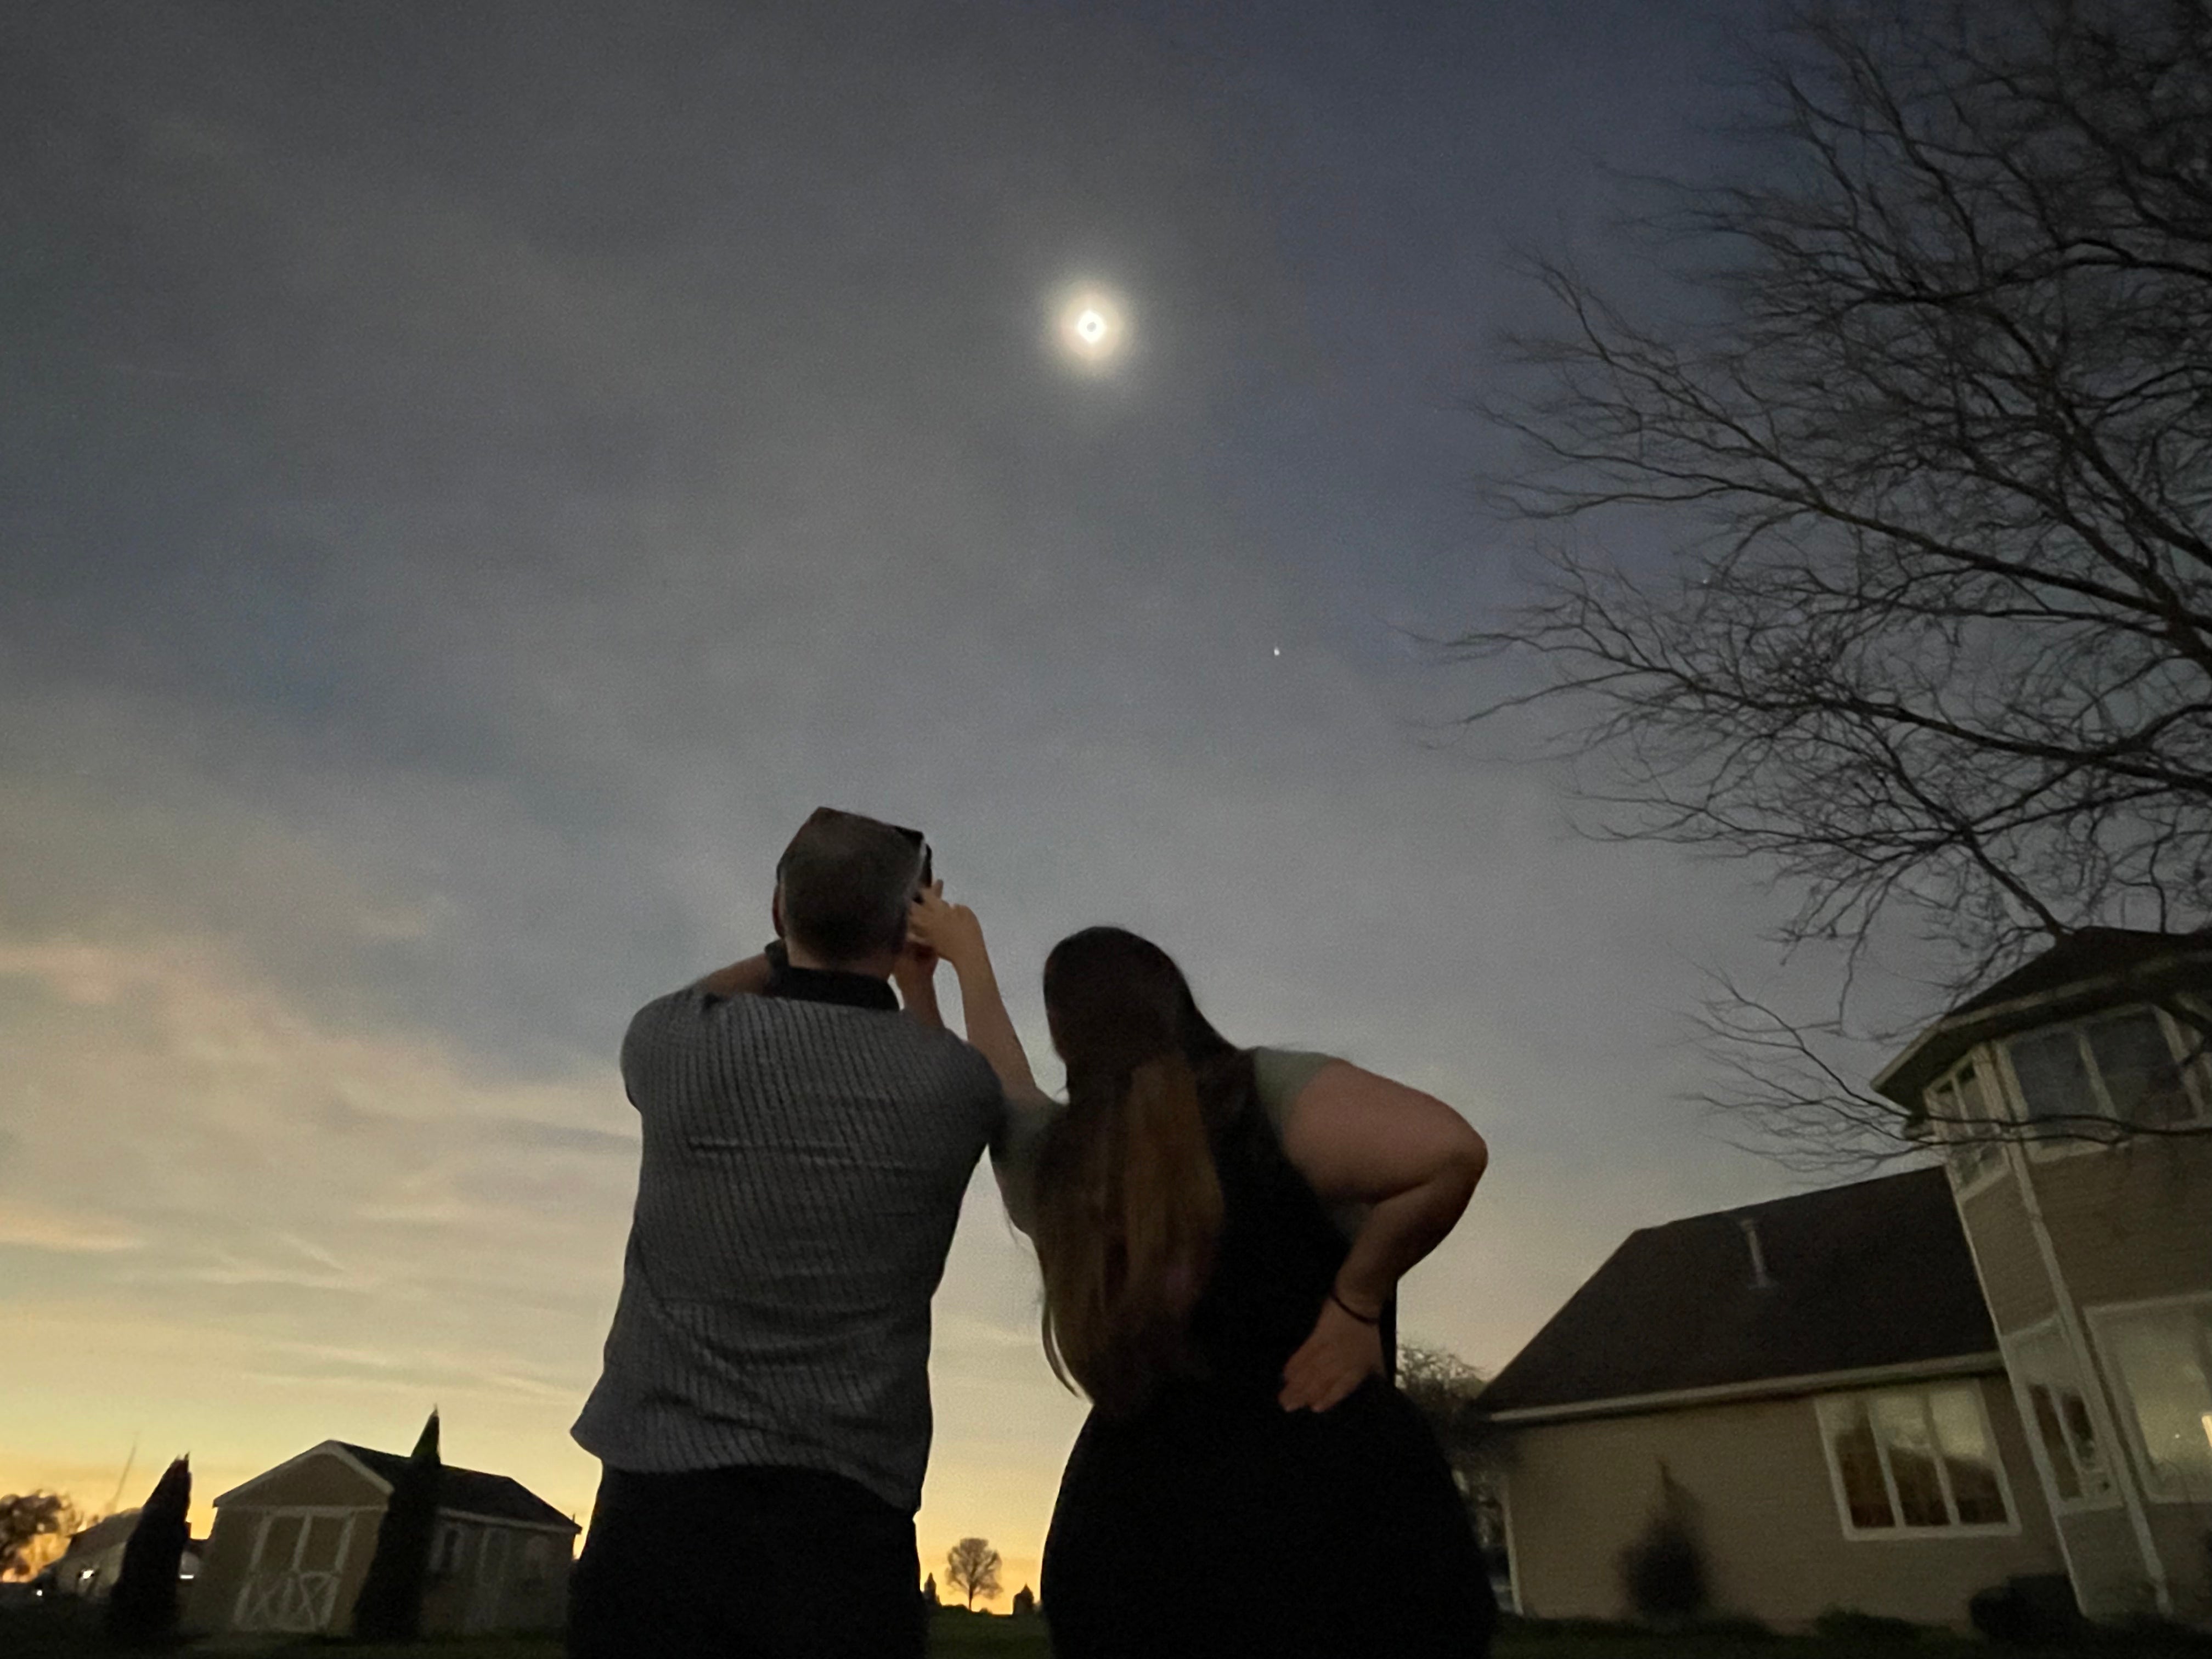 Two people watching a total solar eclipse